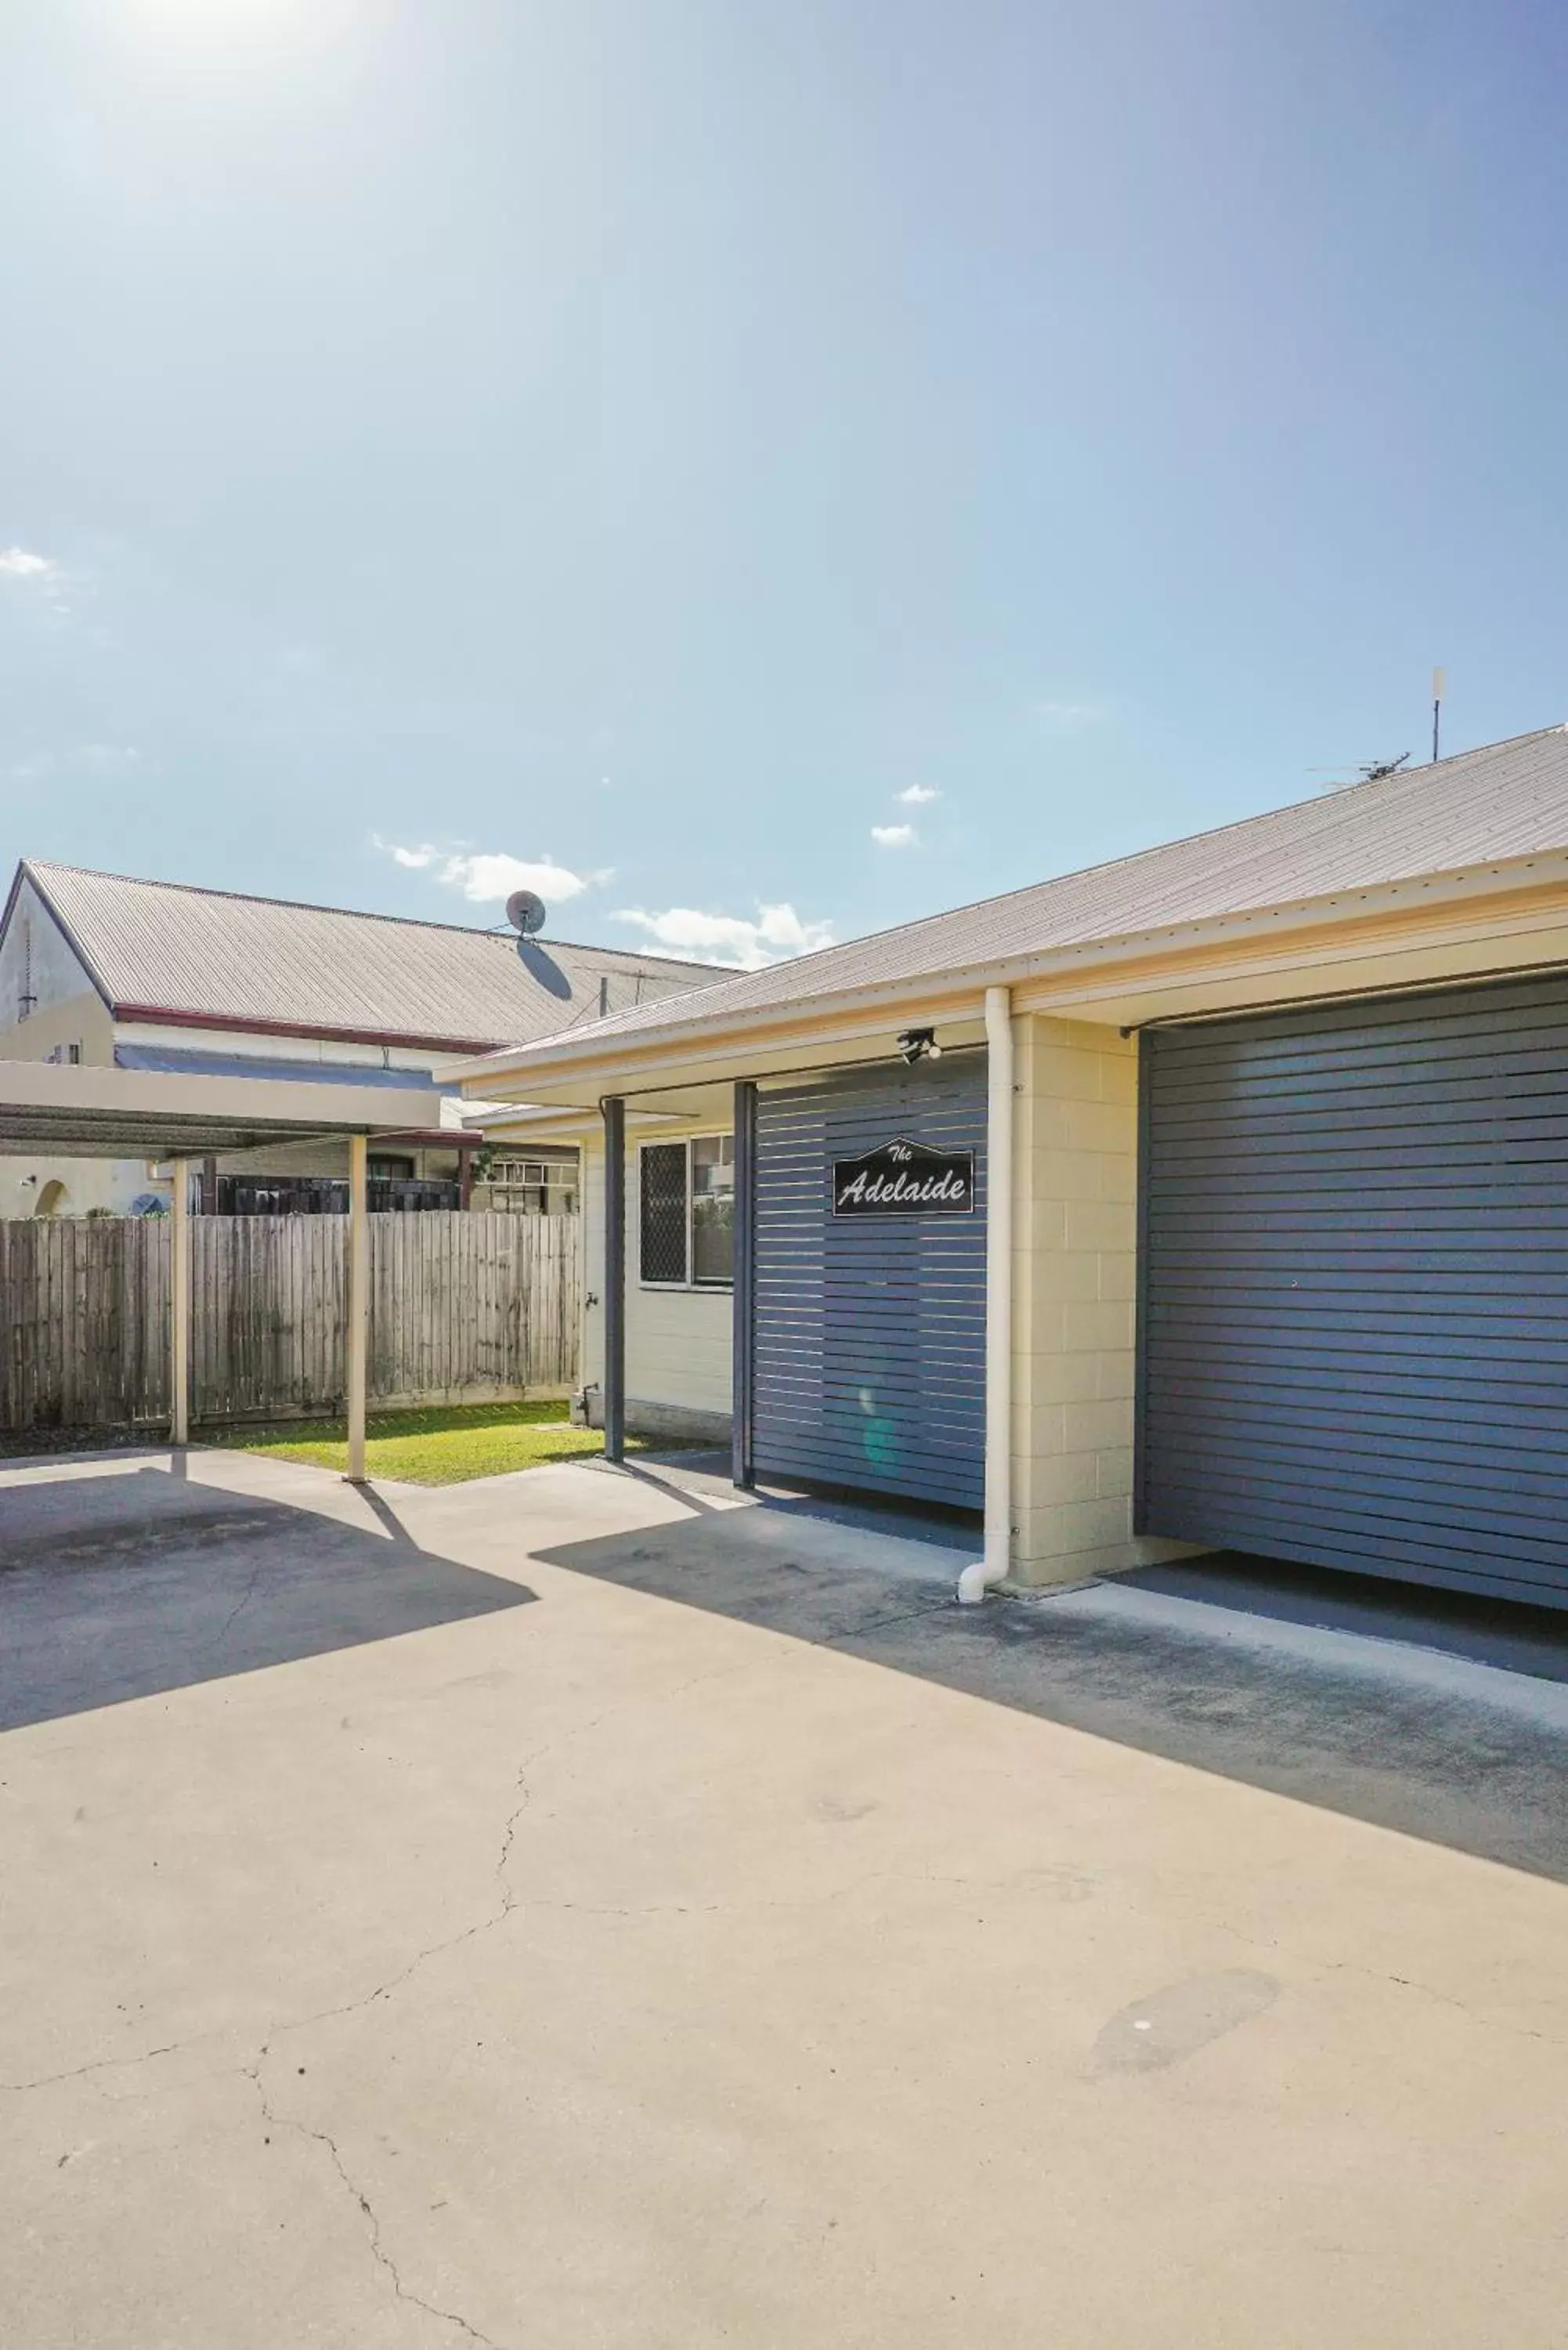 Property building in Rockhampton Serviced Apartments